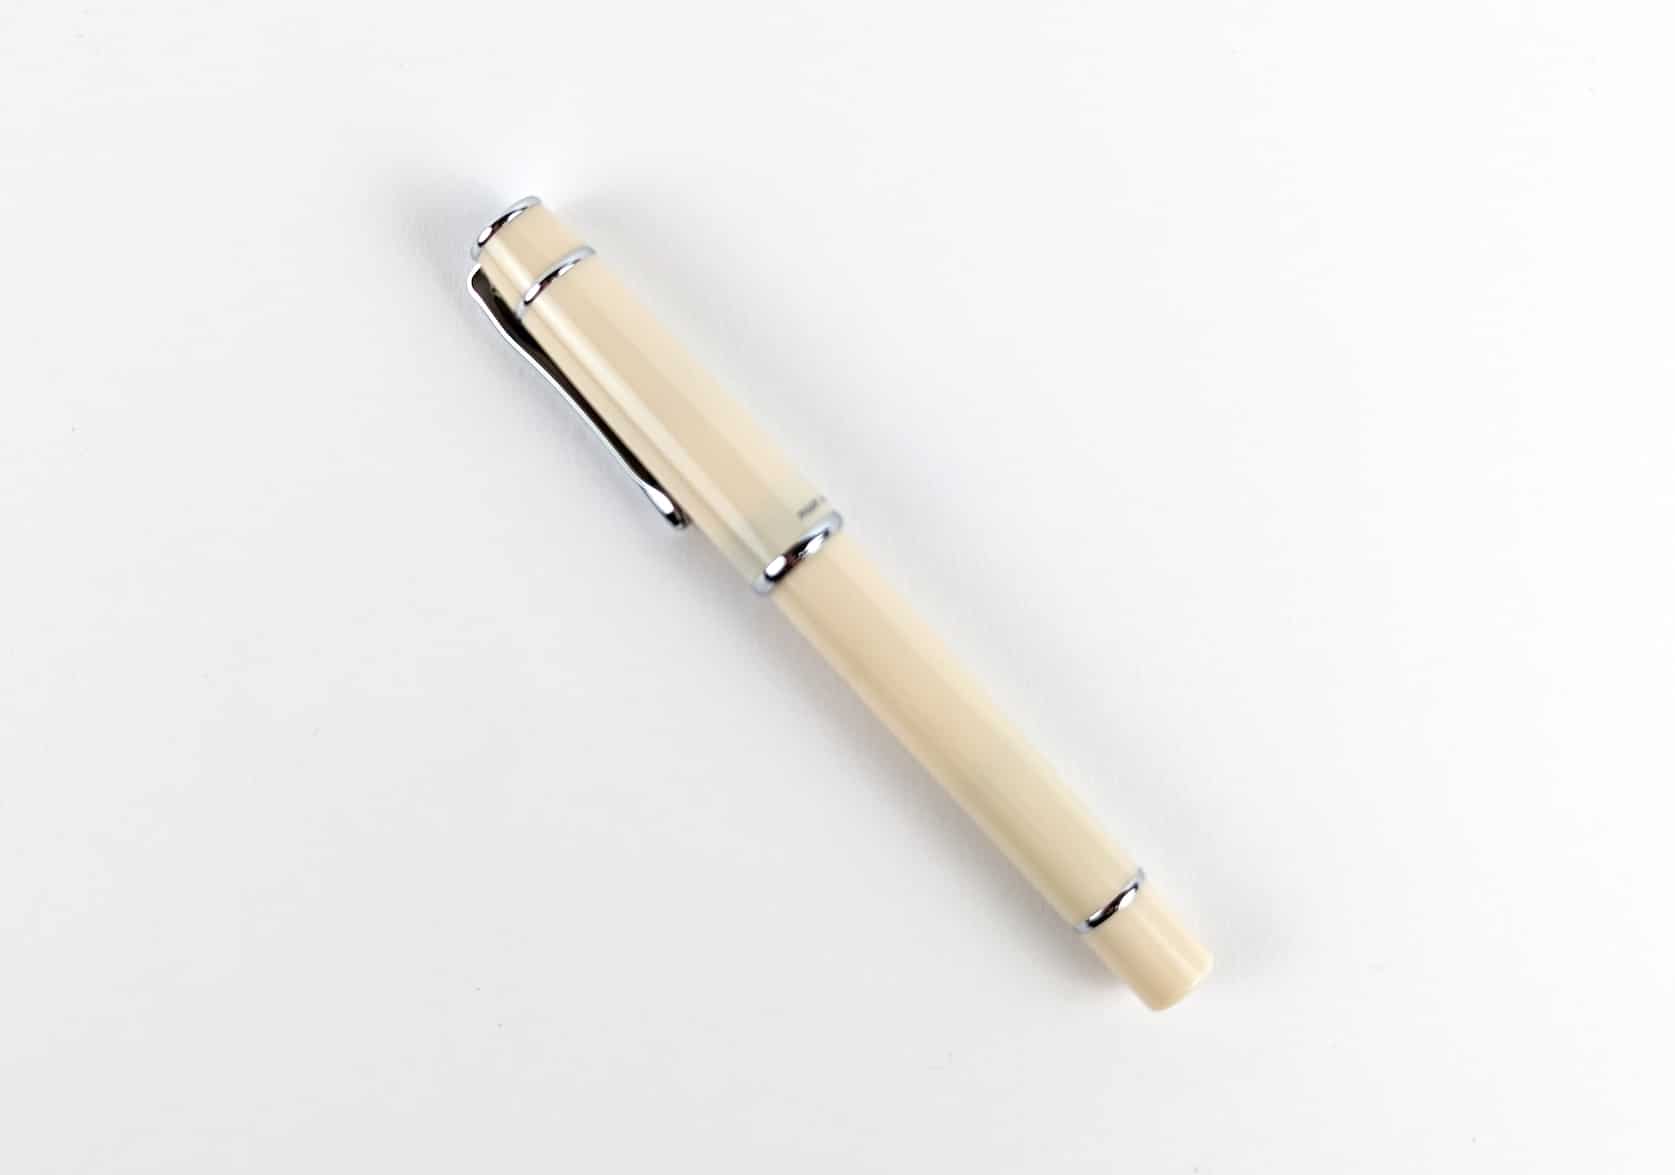 Ivory fountain pen with silver pen clip.